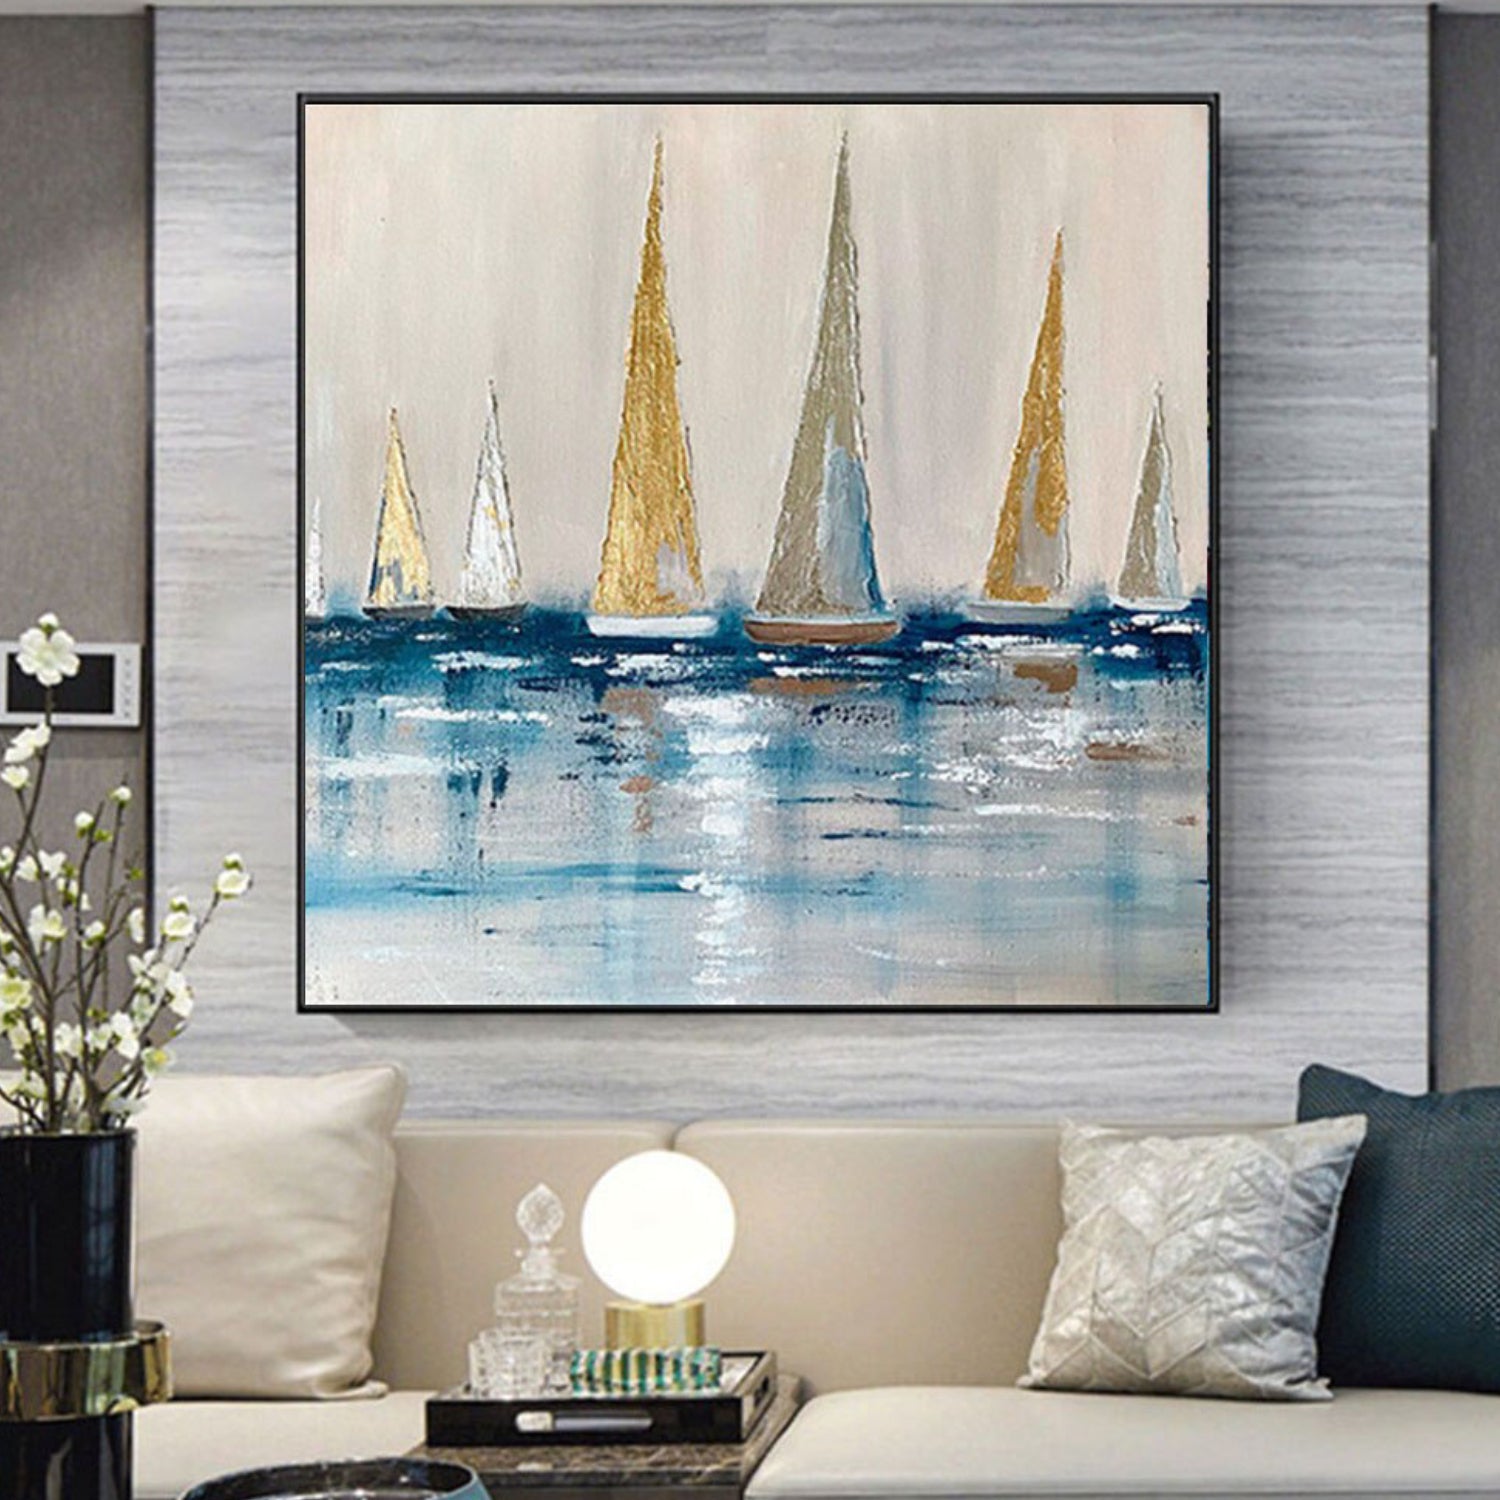 3D Textured Seascape Sailing Boats Oil Painting